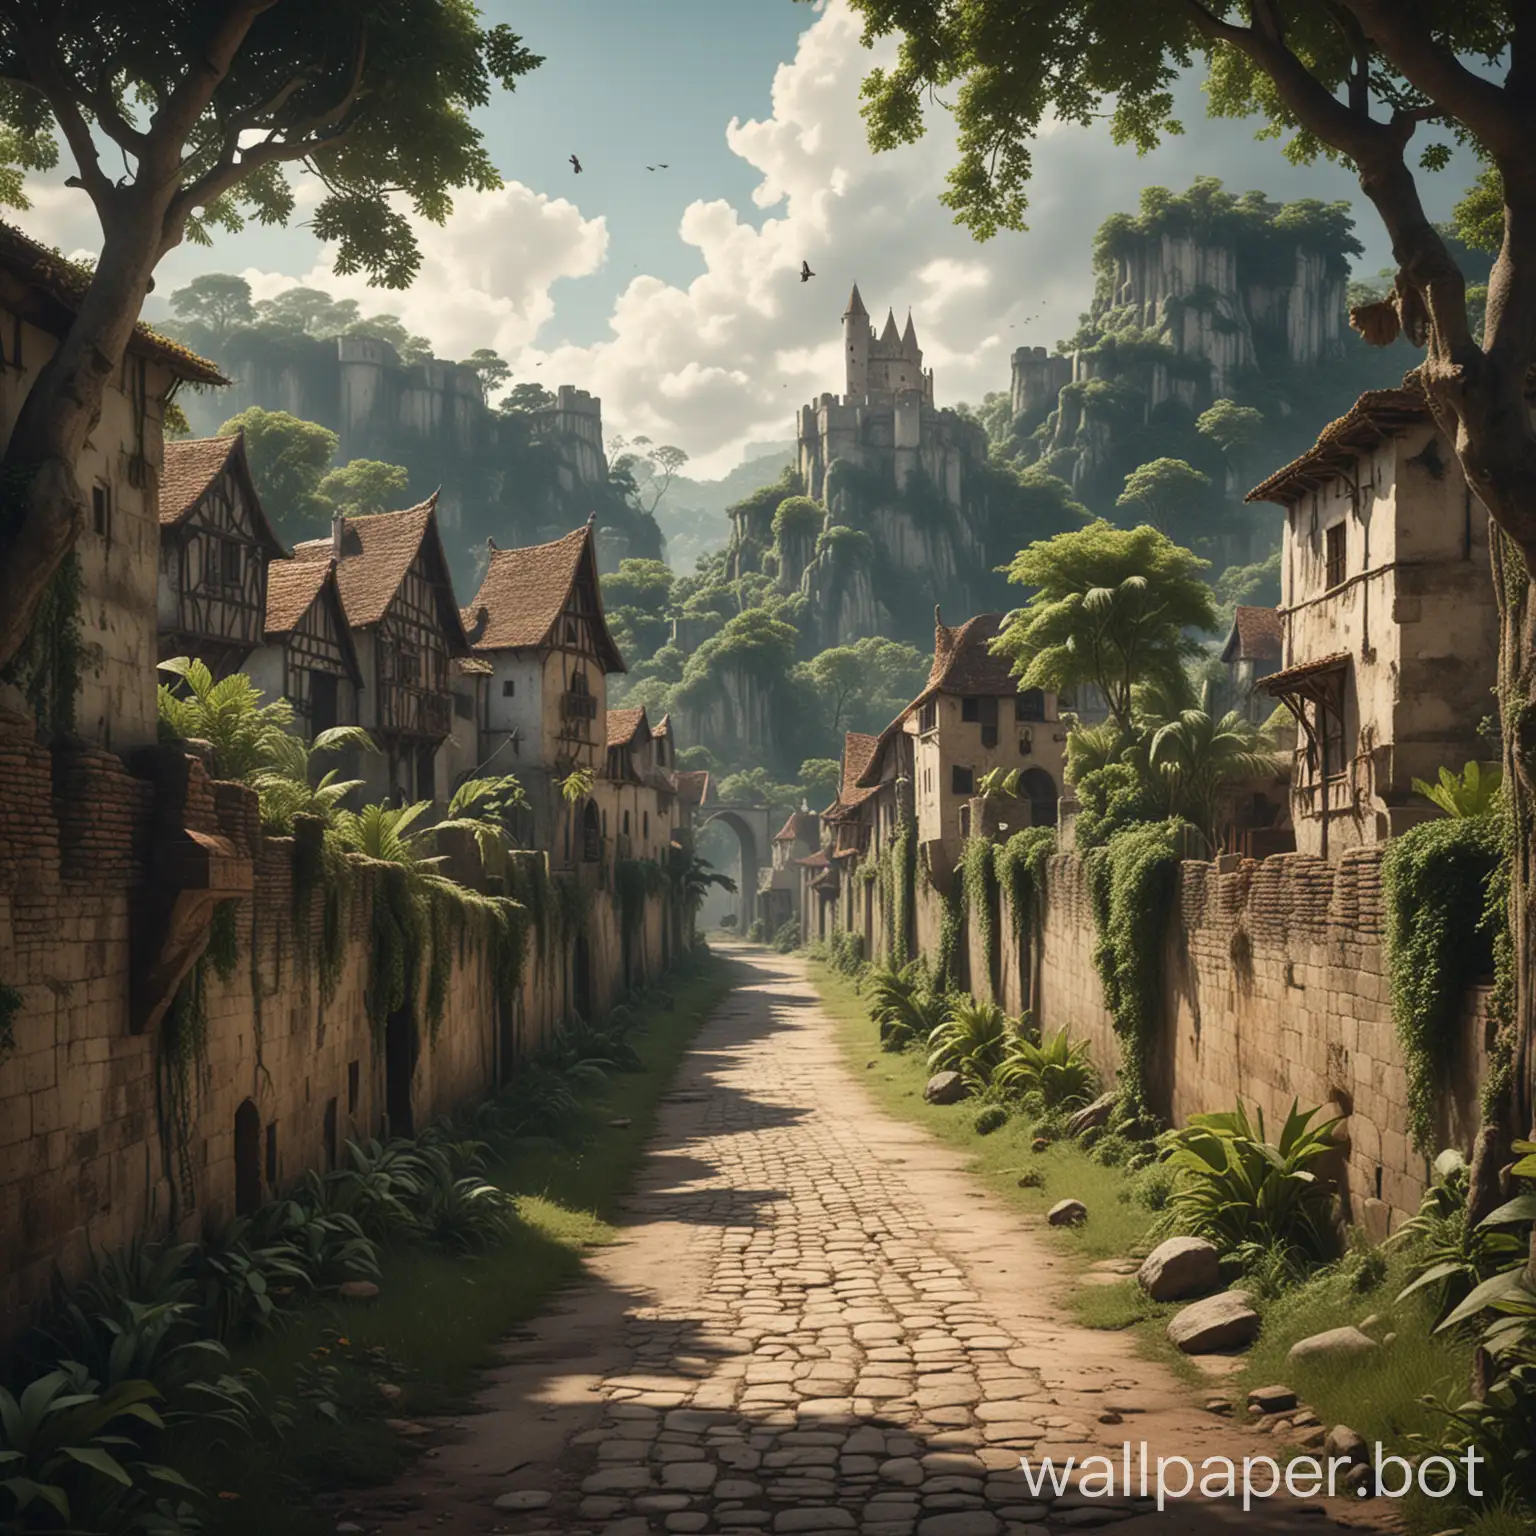 Medieval-Town-Encircled-by-Jungle-Serene-Road-Leading-into-the-Wilderness